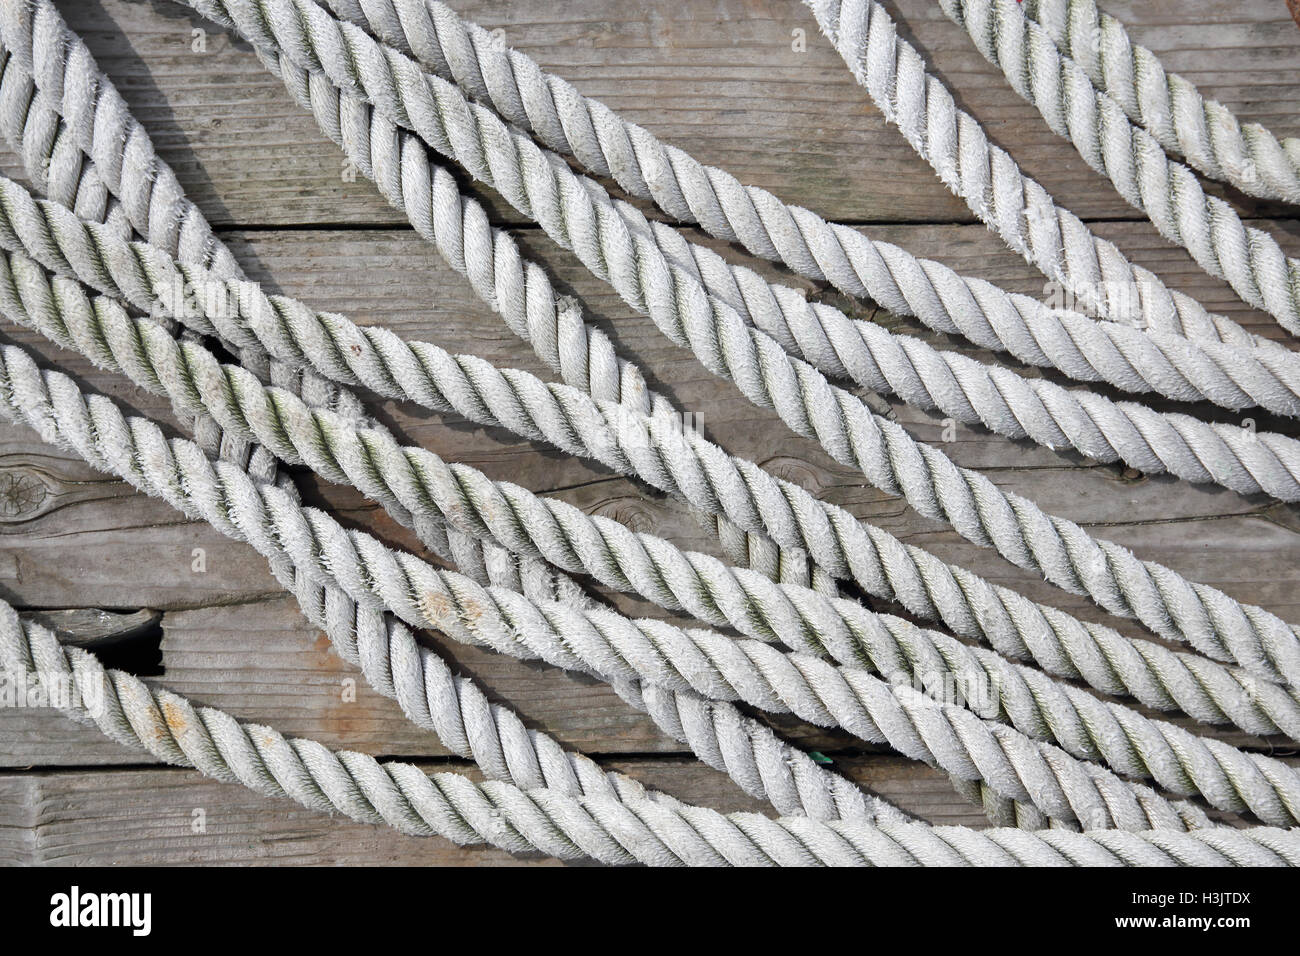 close up of old rope on wooden deck Stock Photo